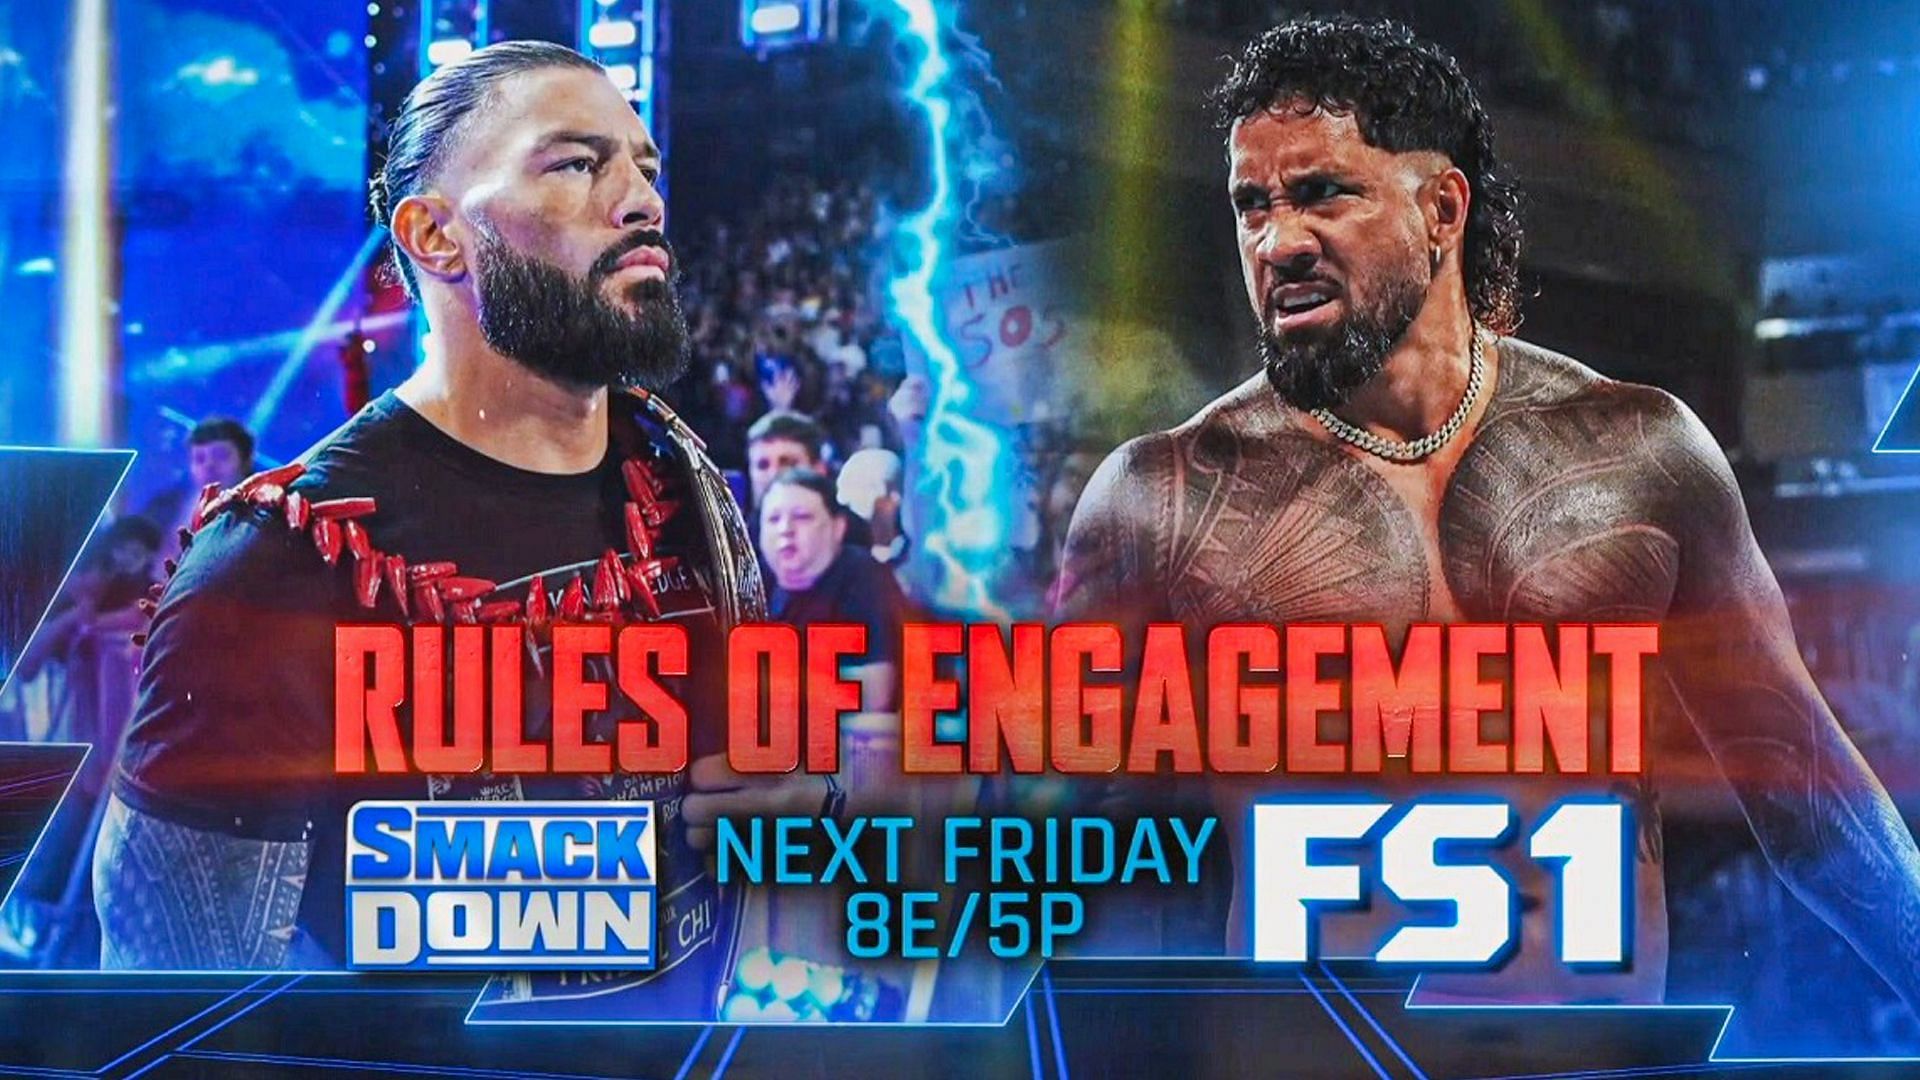 Roman Reigns Jey Uso set for rules of engagement tonight